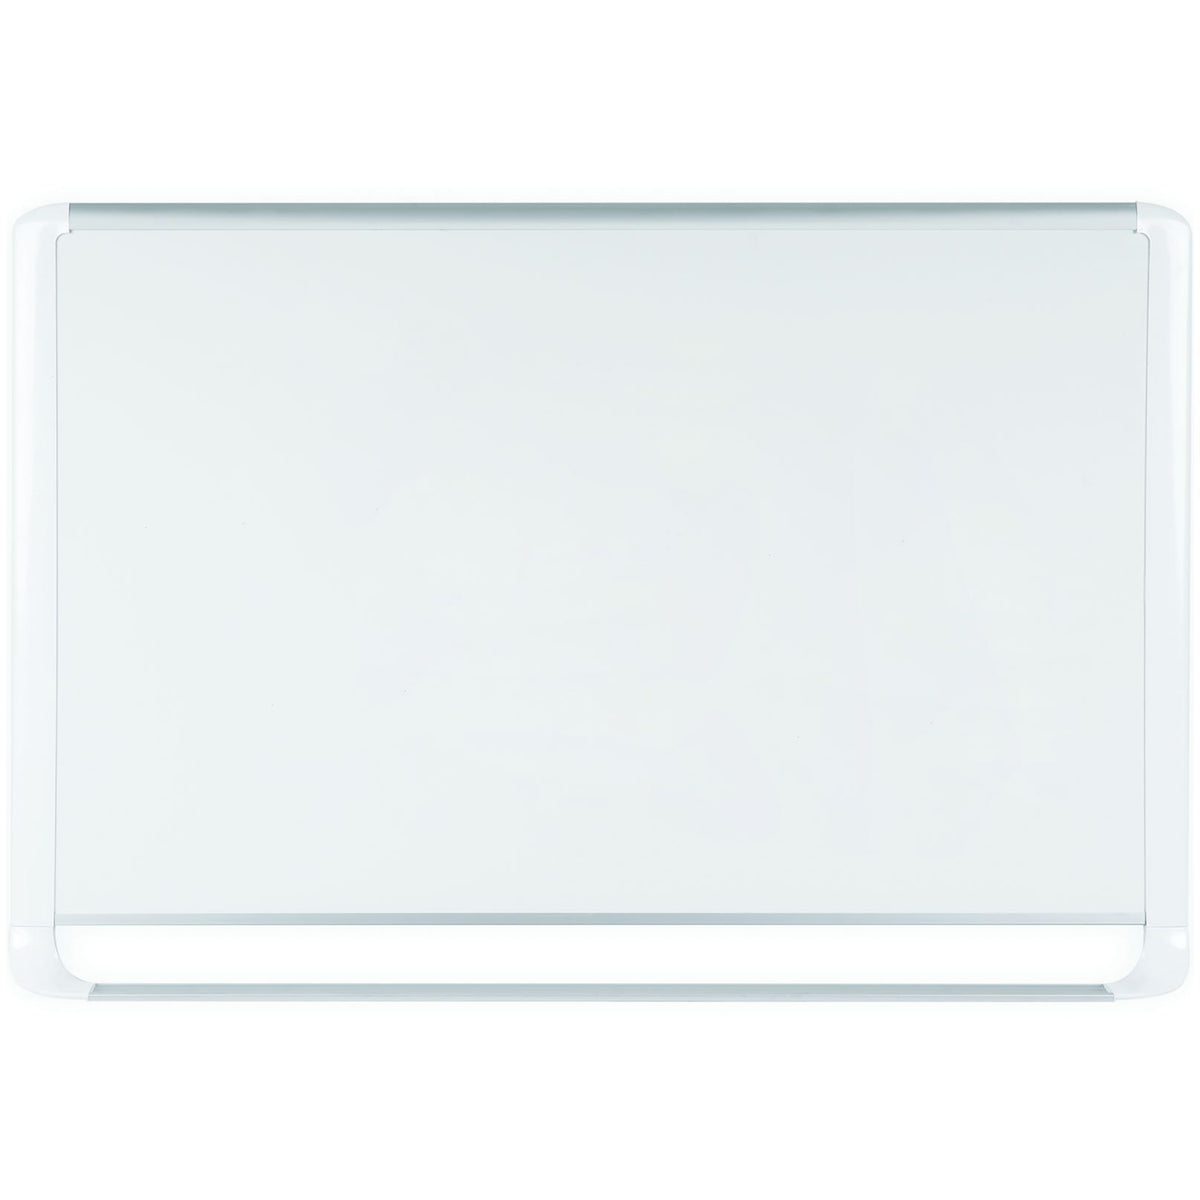 MVI270205 MVI Series Magnetic Laquered Steel Dry Erase Board, Easy Clean, Scratch Resistant Wall Mounting Whiteboard, 48" x 72", White Frame by MasterVision